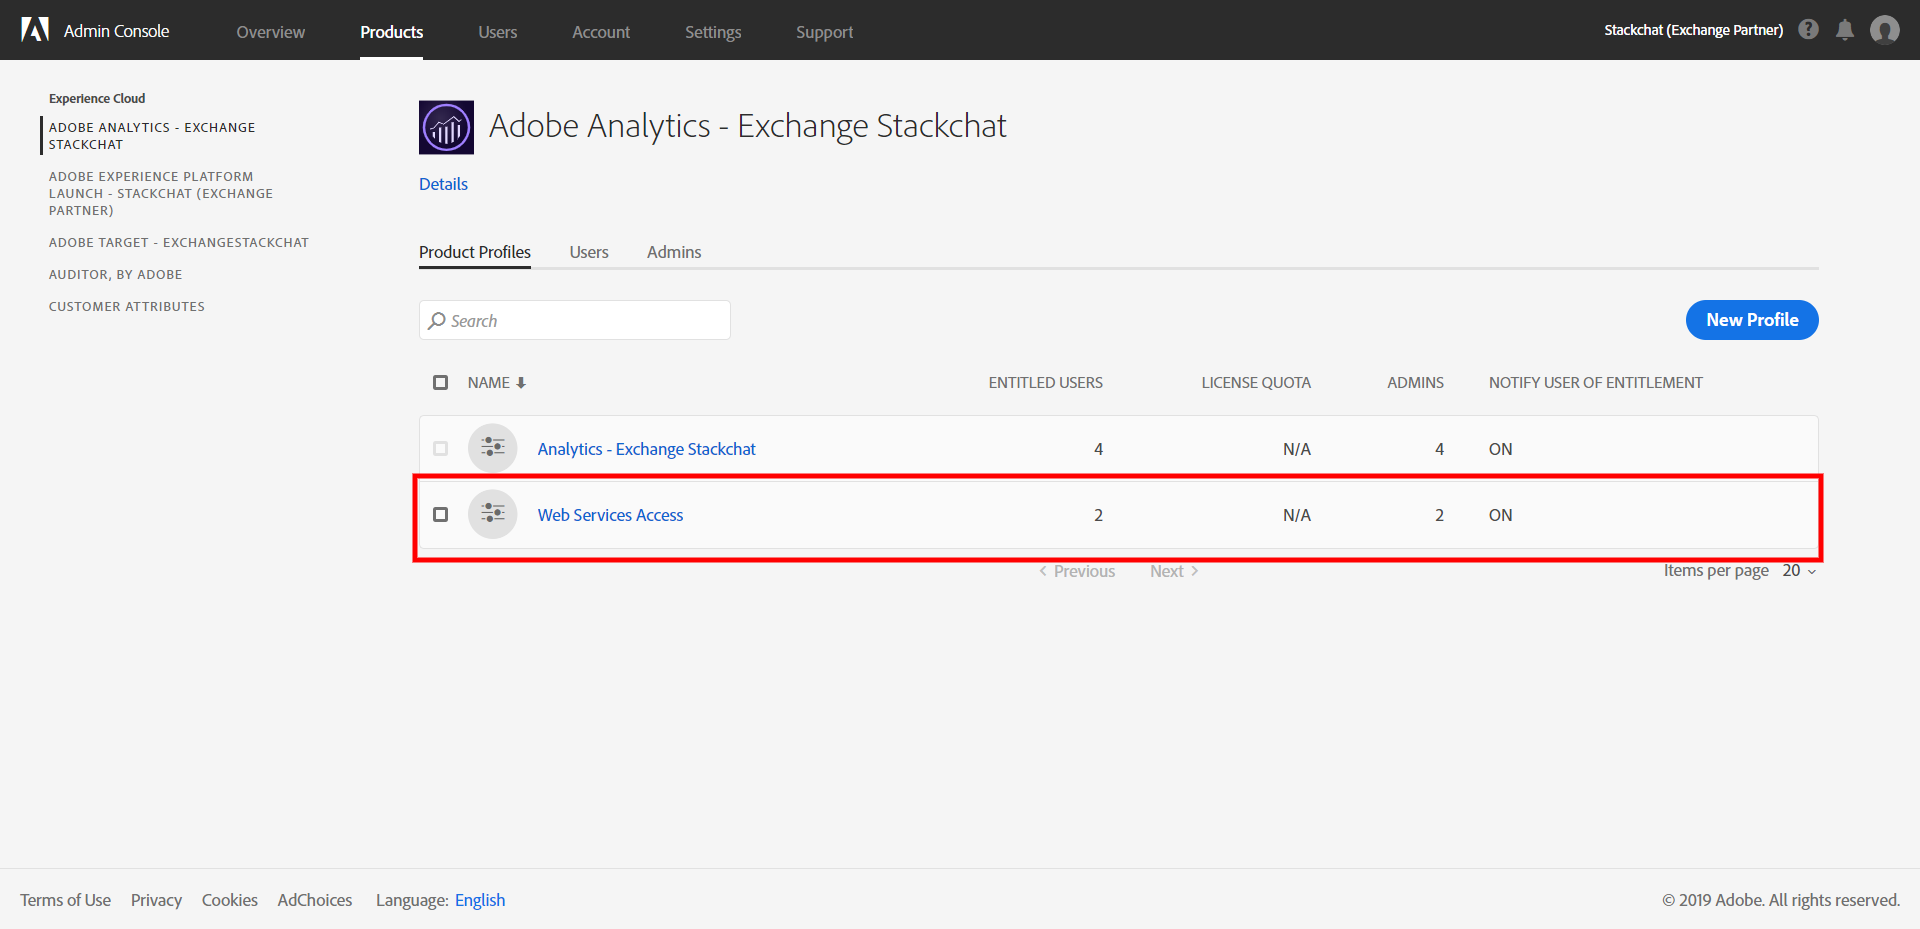 Adobe Analytics Product Profiles Page With Profile